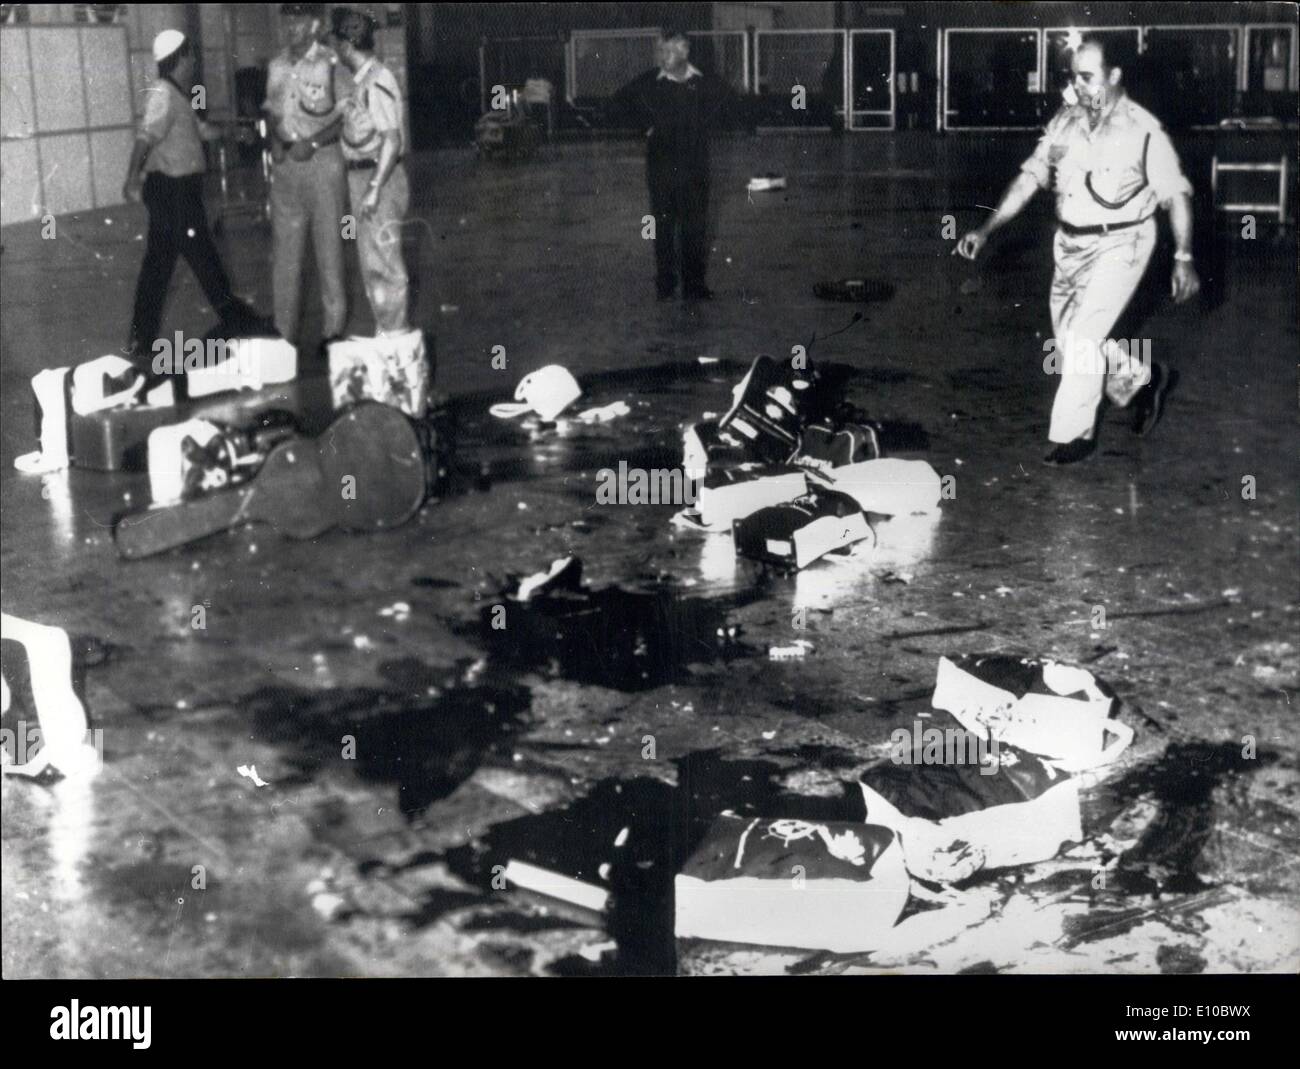 May 31, 1972 - 26 Killed In Terrorist Attack At Tel Aviv Airport: 26 people were killed and many injured when three Japanese terrorists automatic rifles and threw hand grenades in the terminal at Lod Airport, Tel Aviv, last night. Photo Shows Scene at the terminal at Lord Airport, Tel Aviv, after the terror attack. Stock Photo